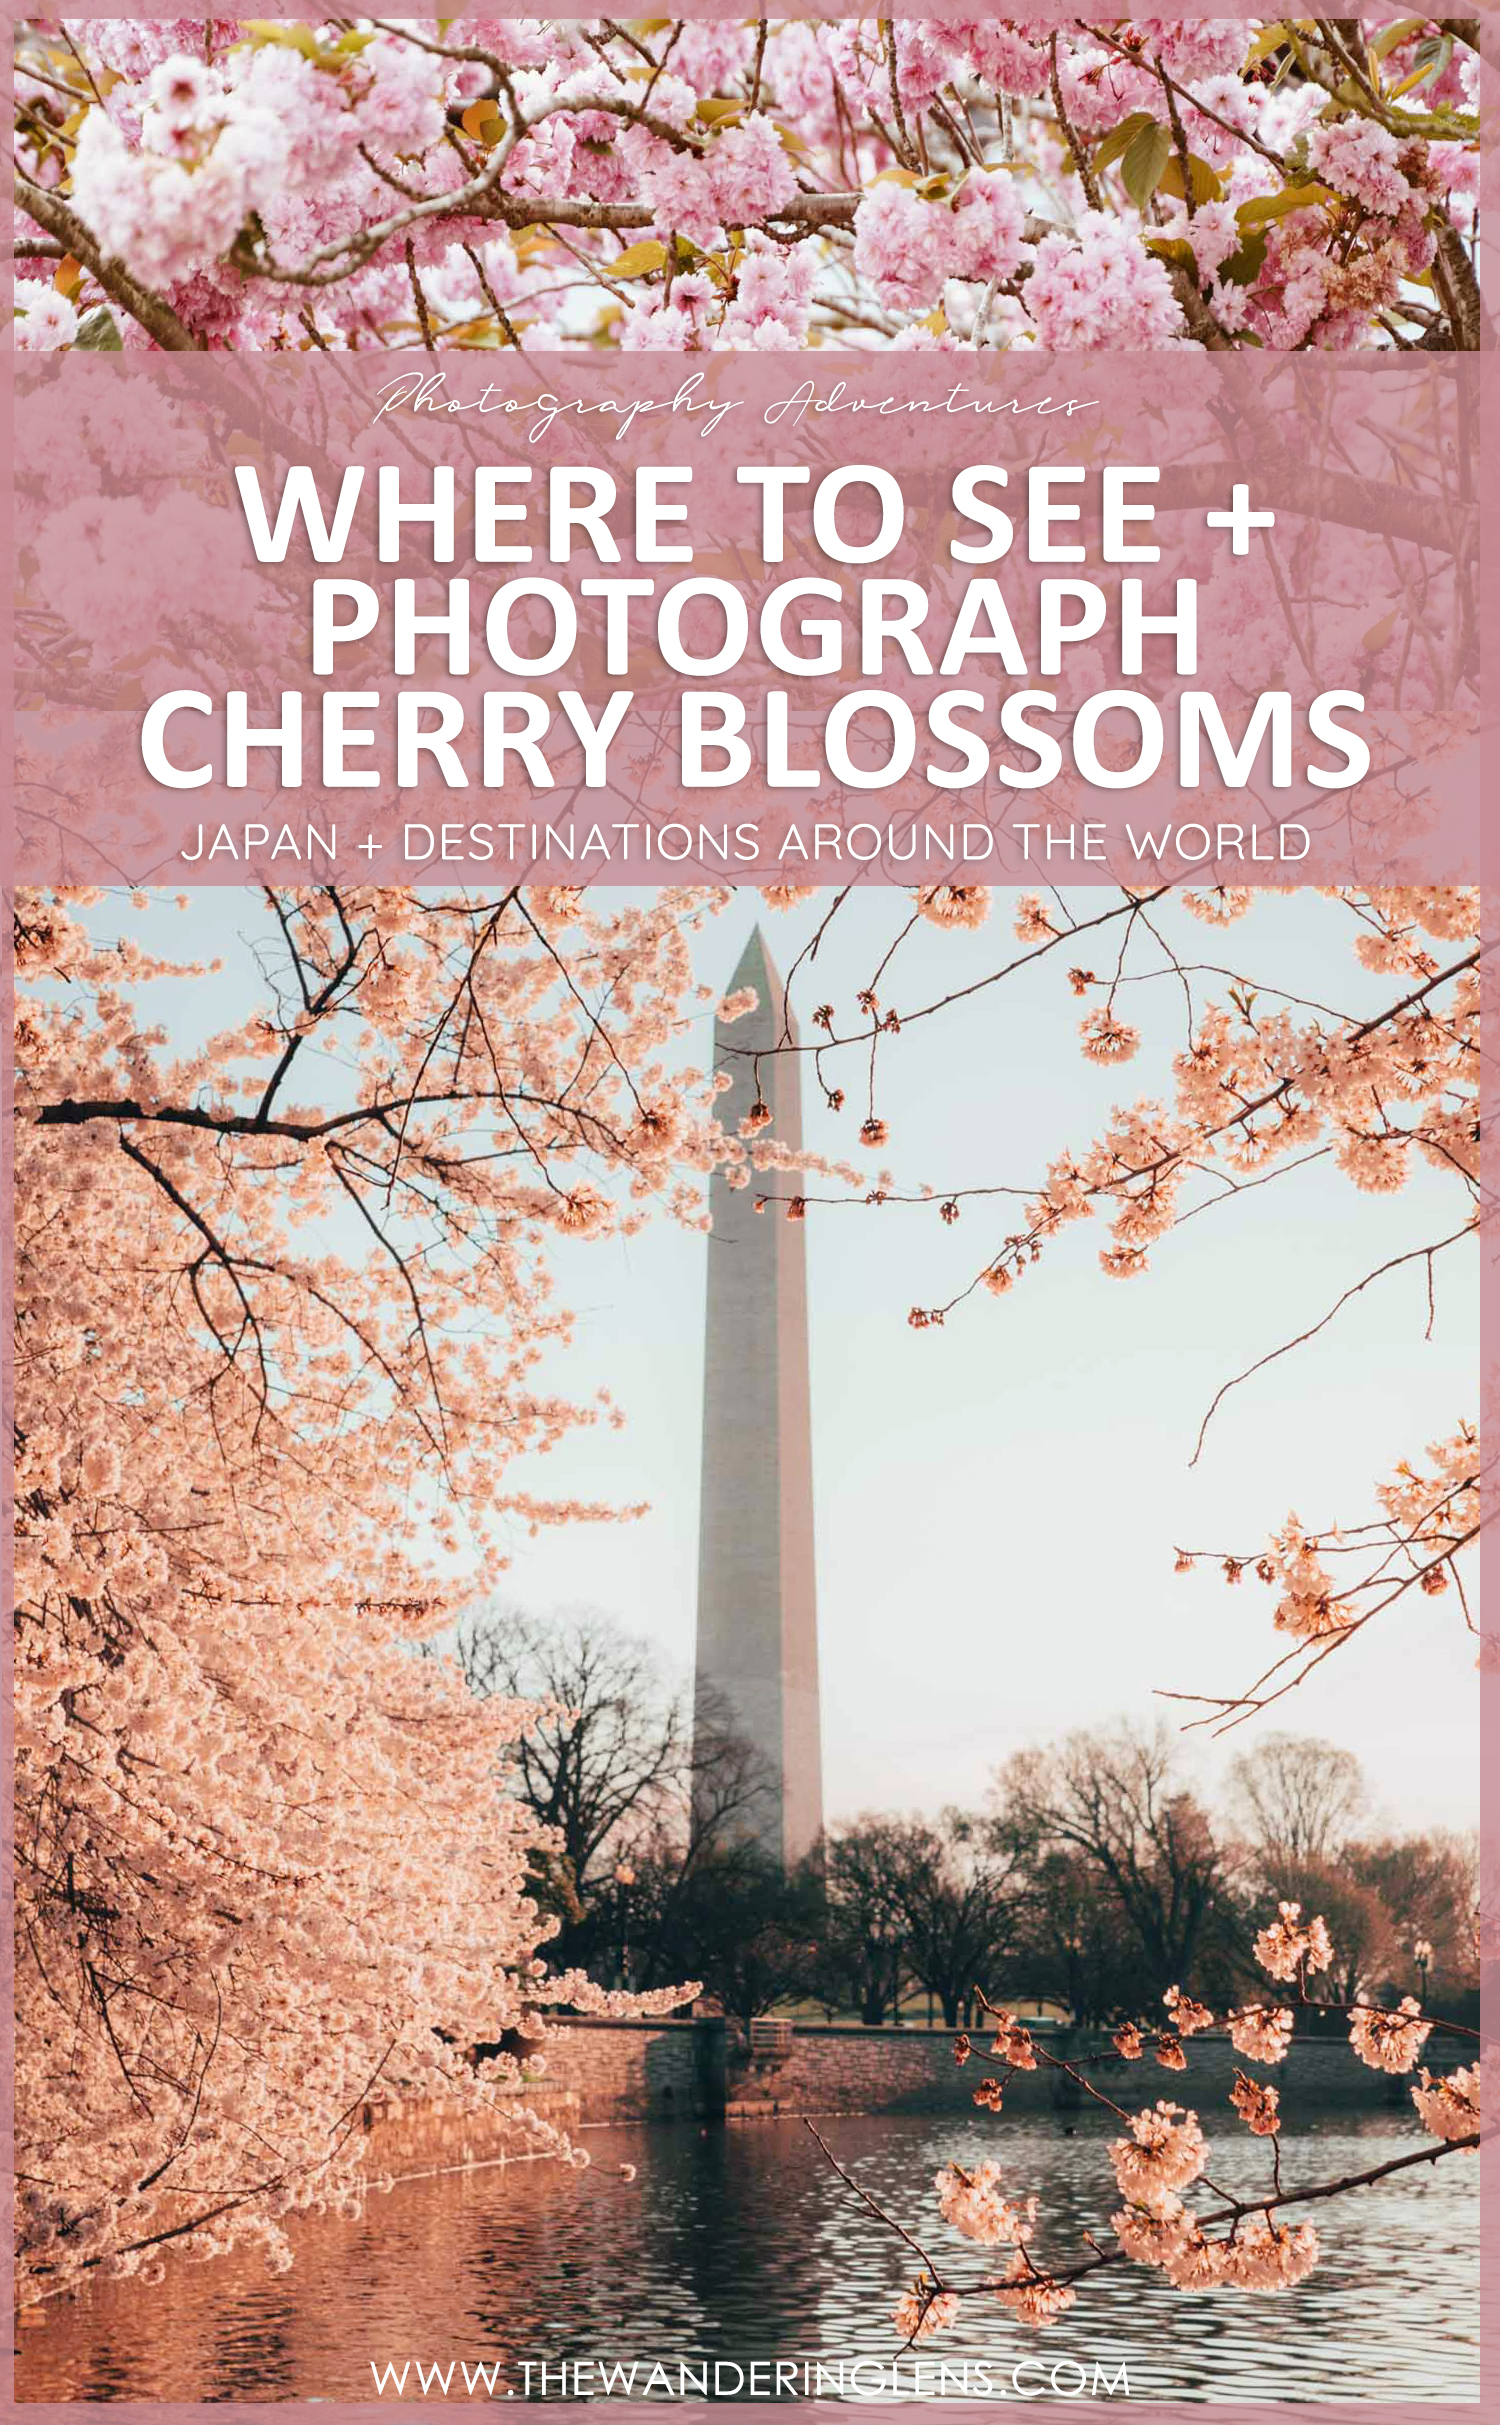 Where to Photograph Cherry Blossoms